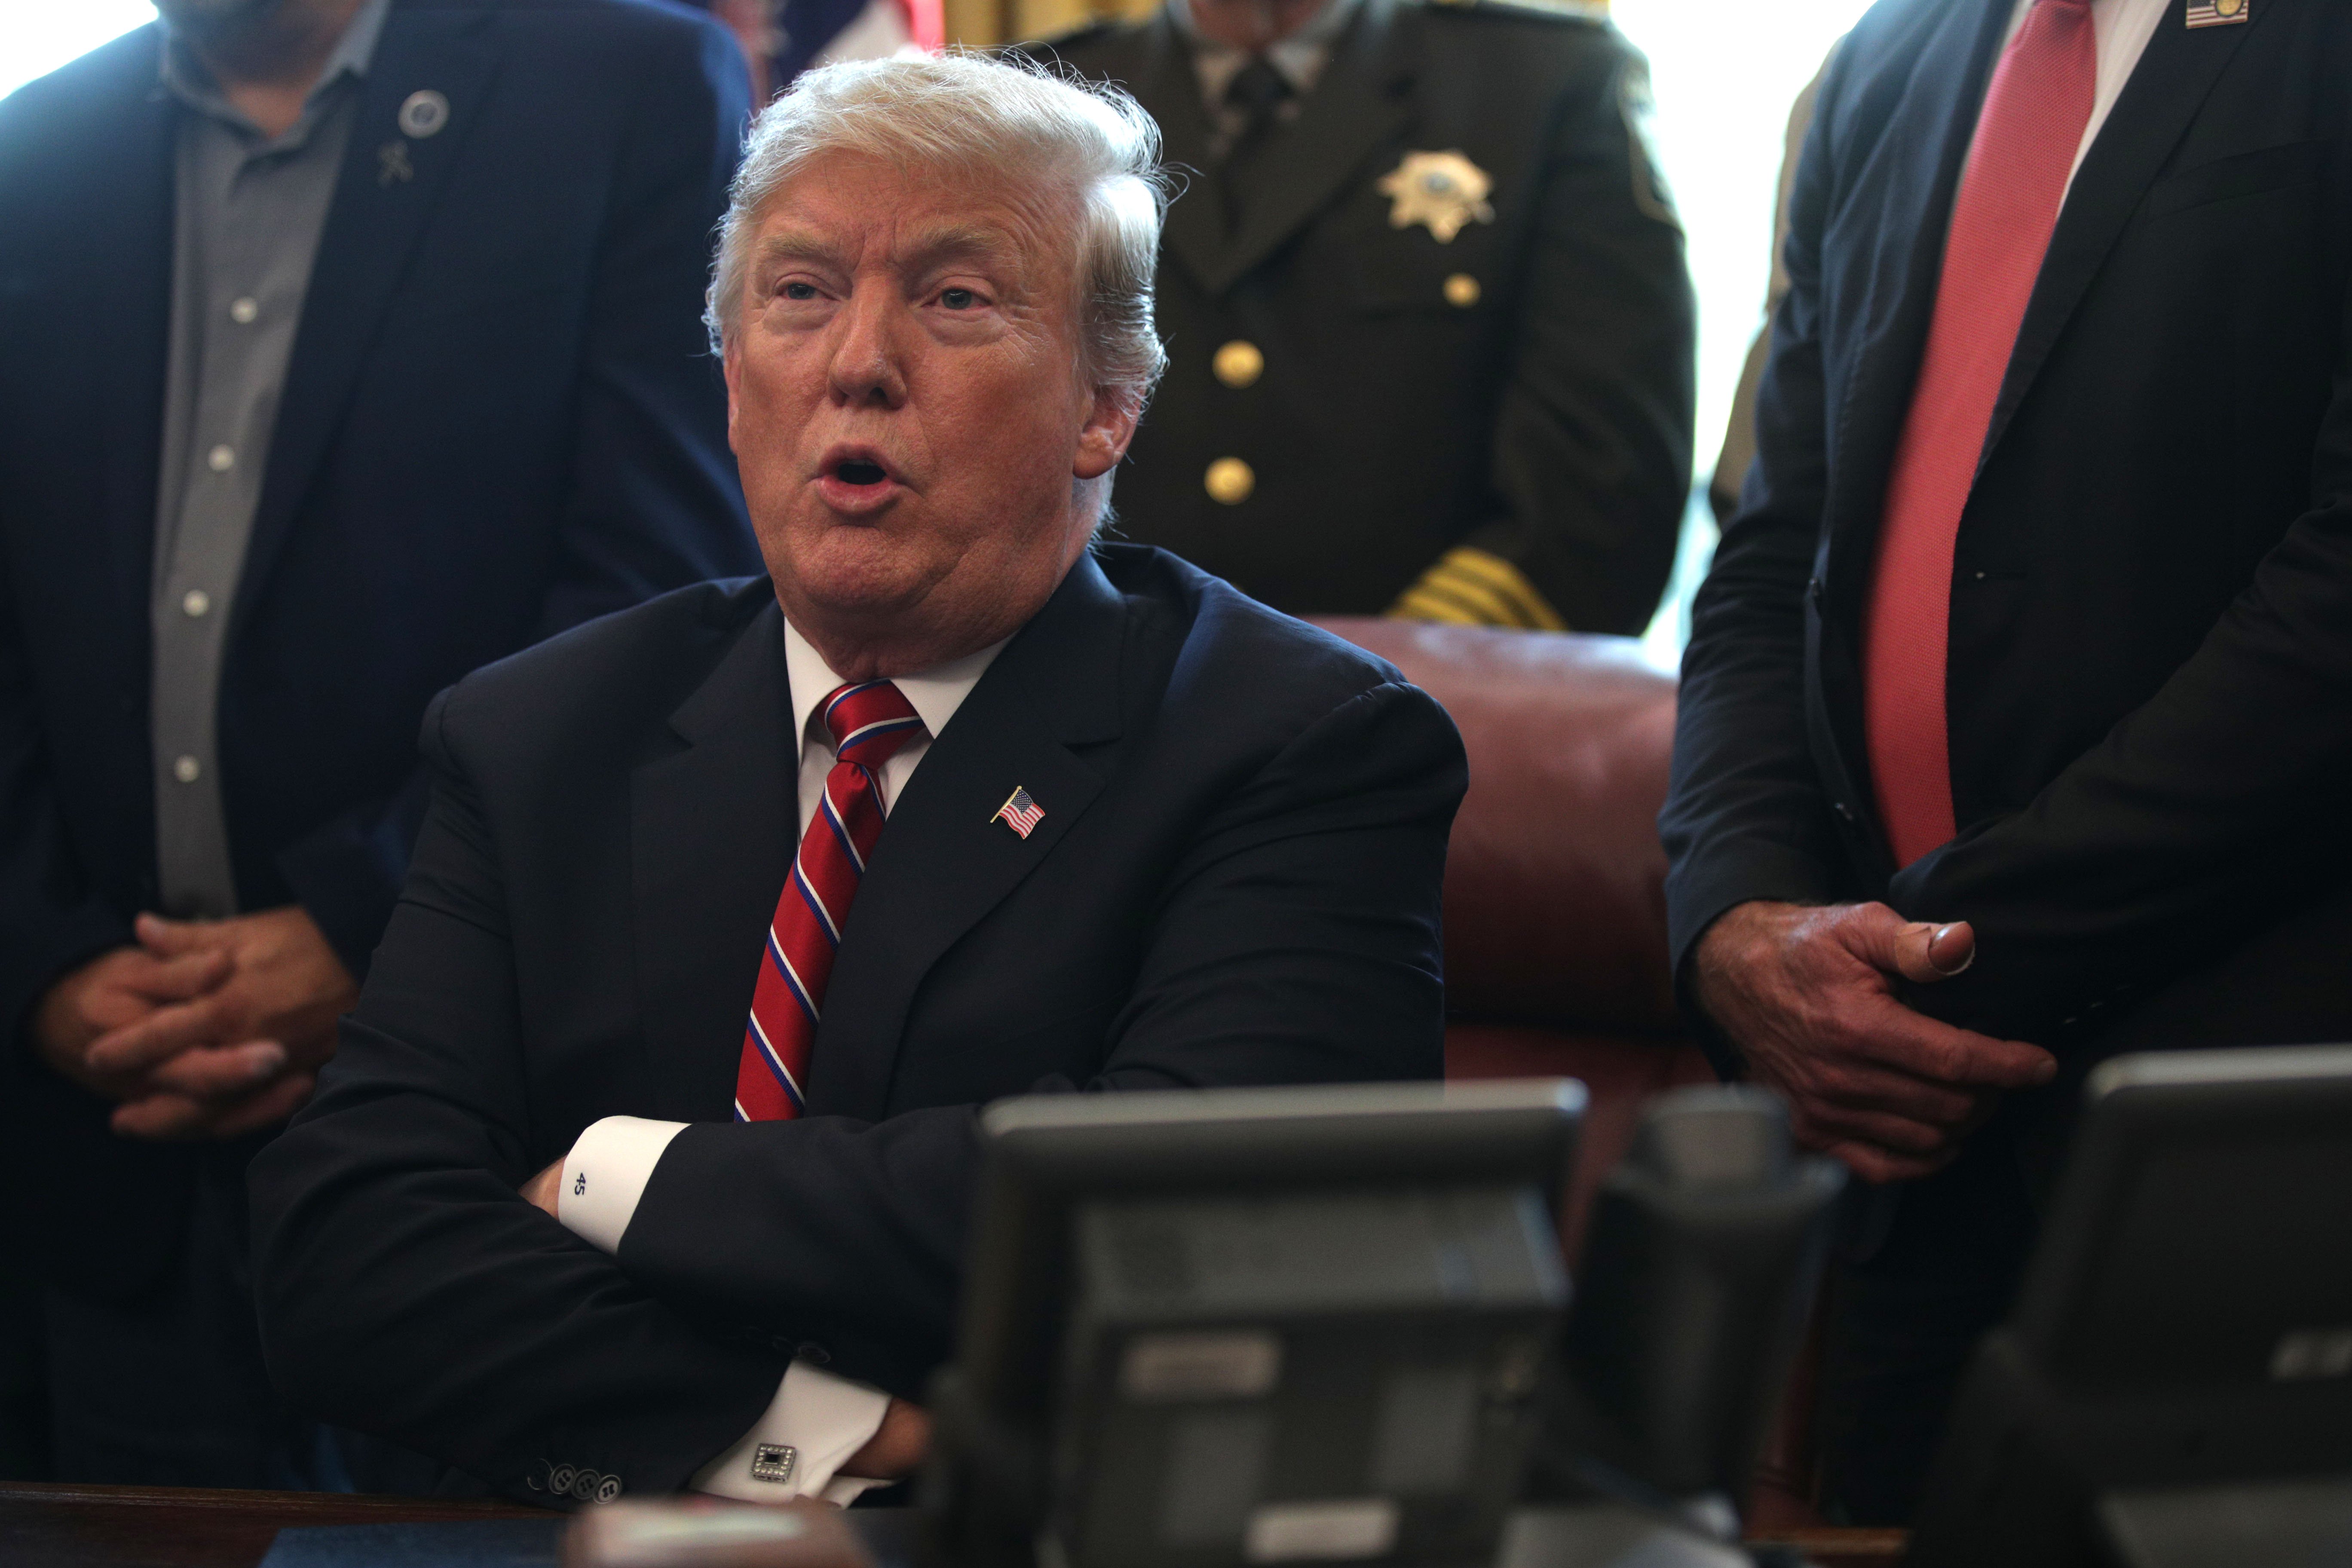 Donald Trump speaking during a border security event in the Oval Office at the White House | Photo: Getty Images